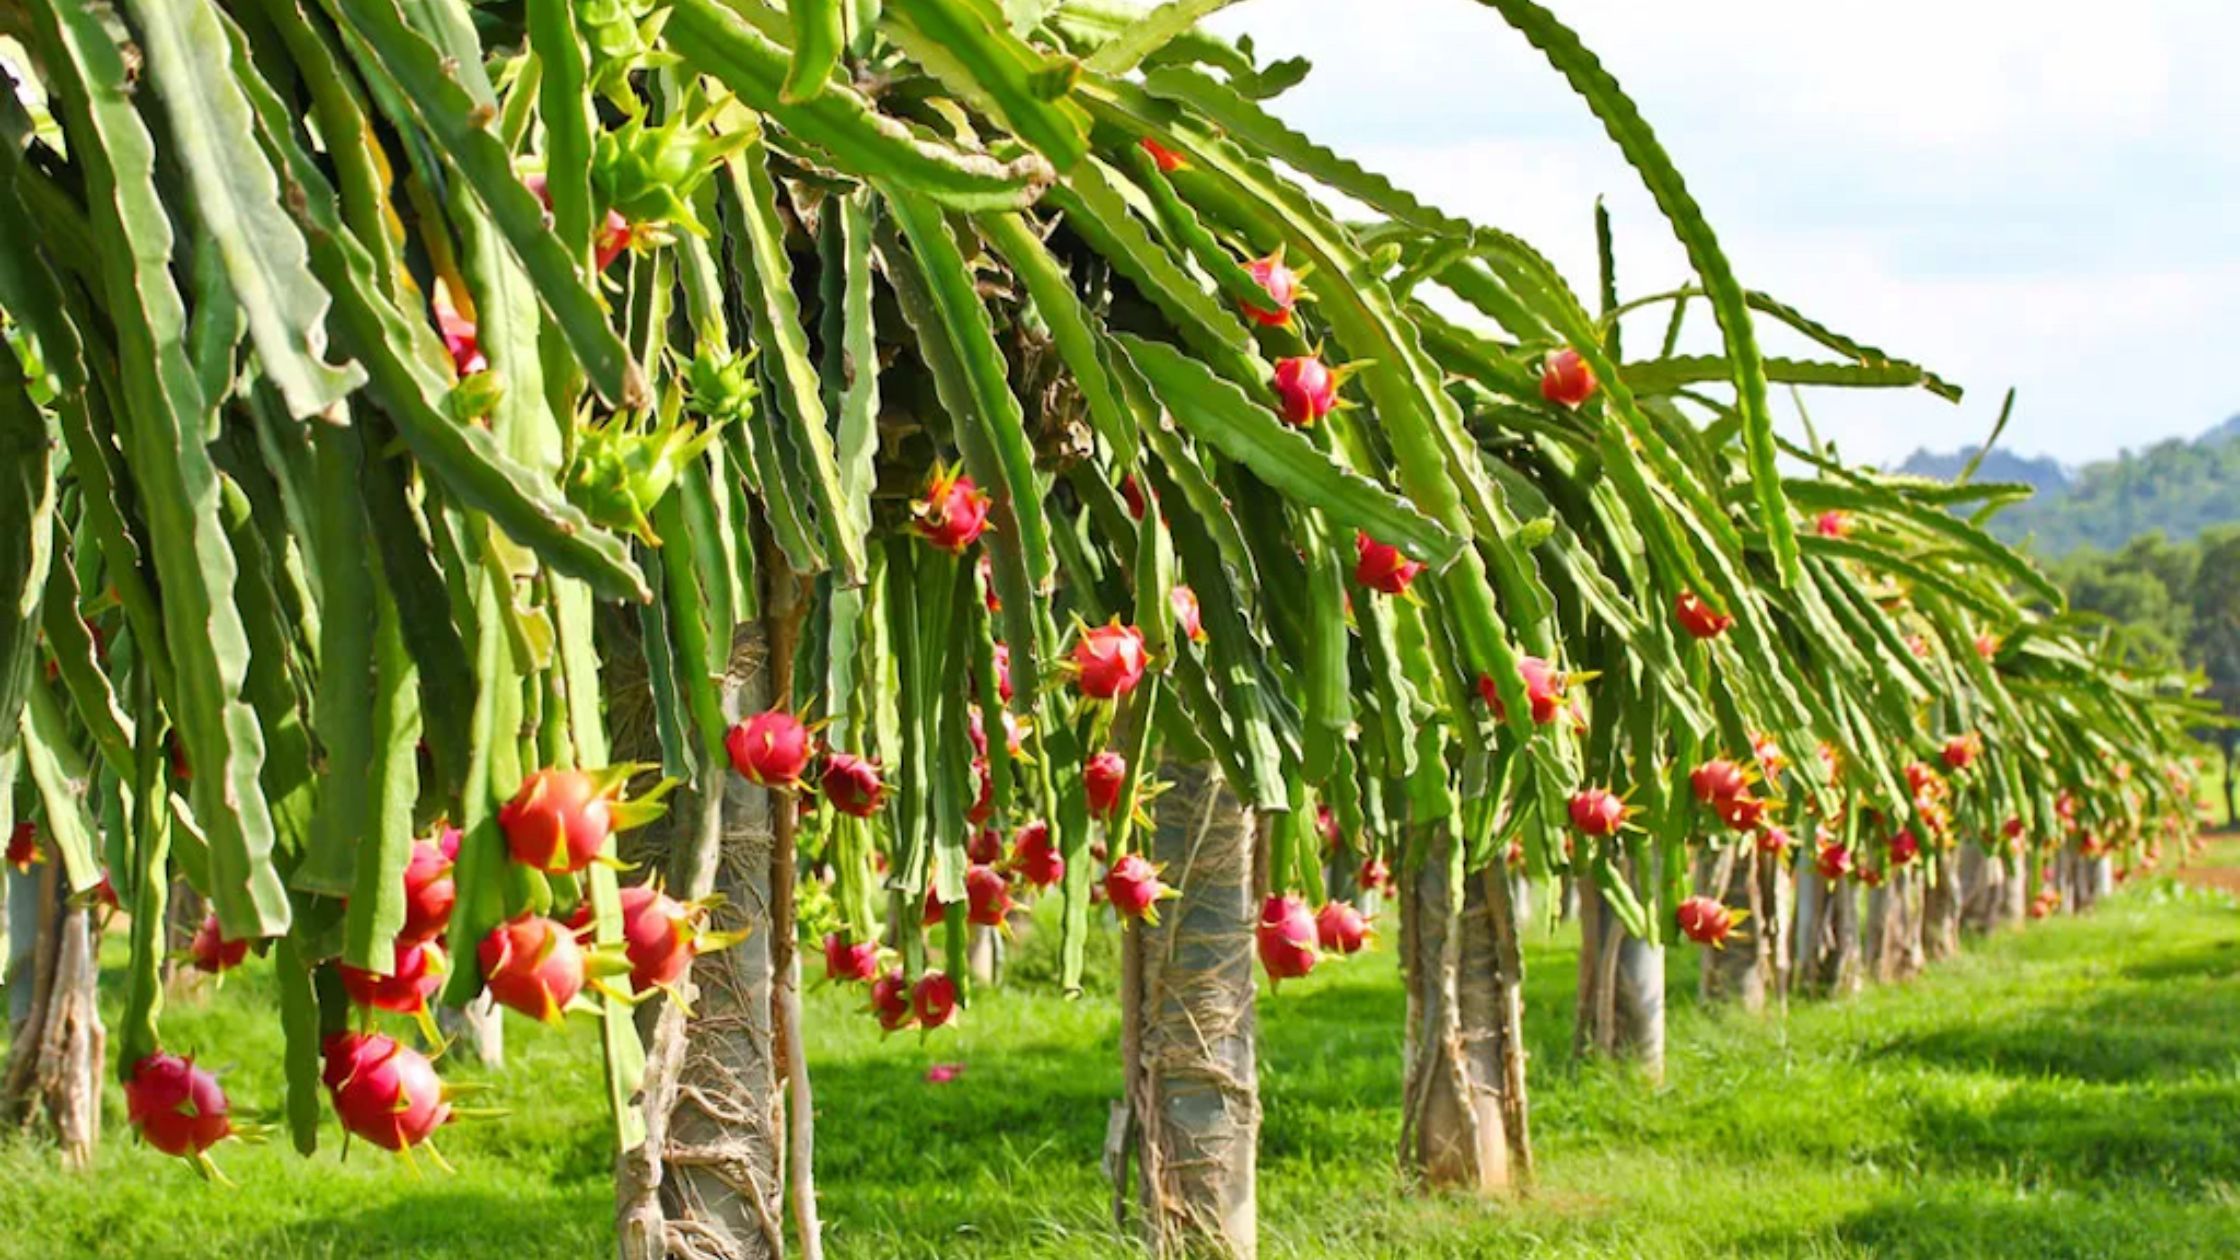 dragon fruit one hectare cultivation cost one lakh 25 thousand rupees 50 percent subsidy